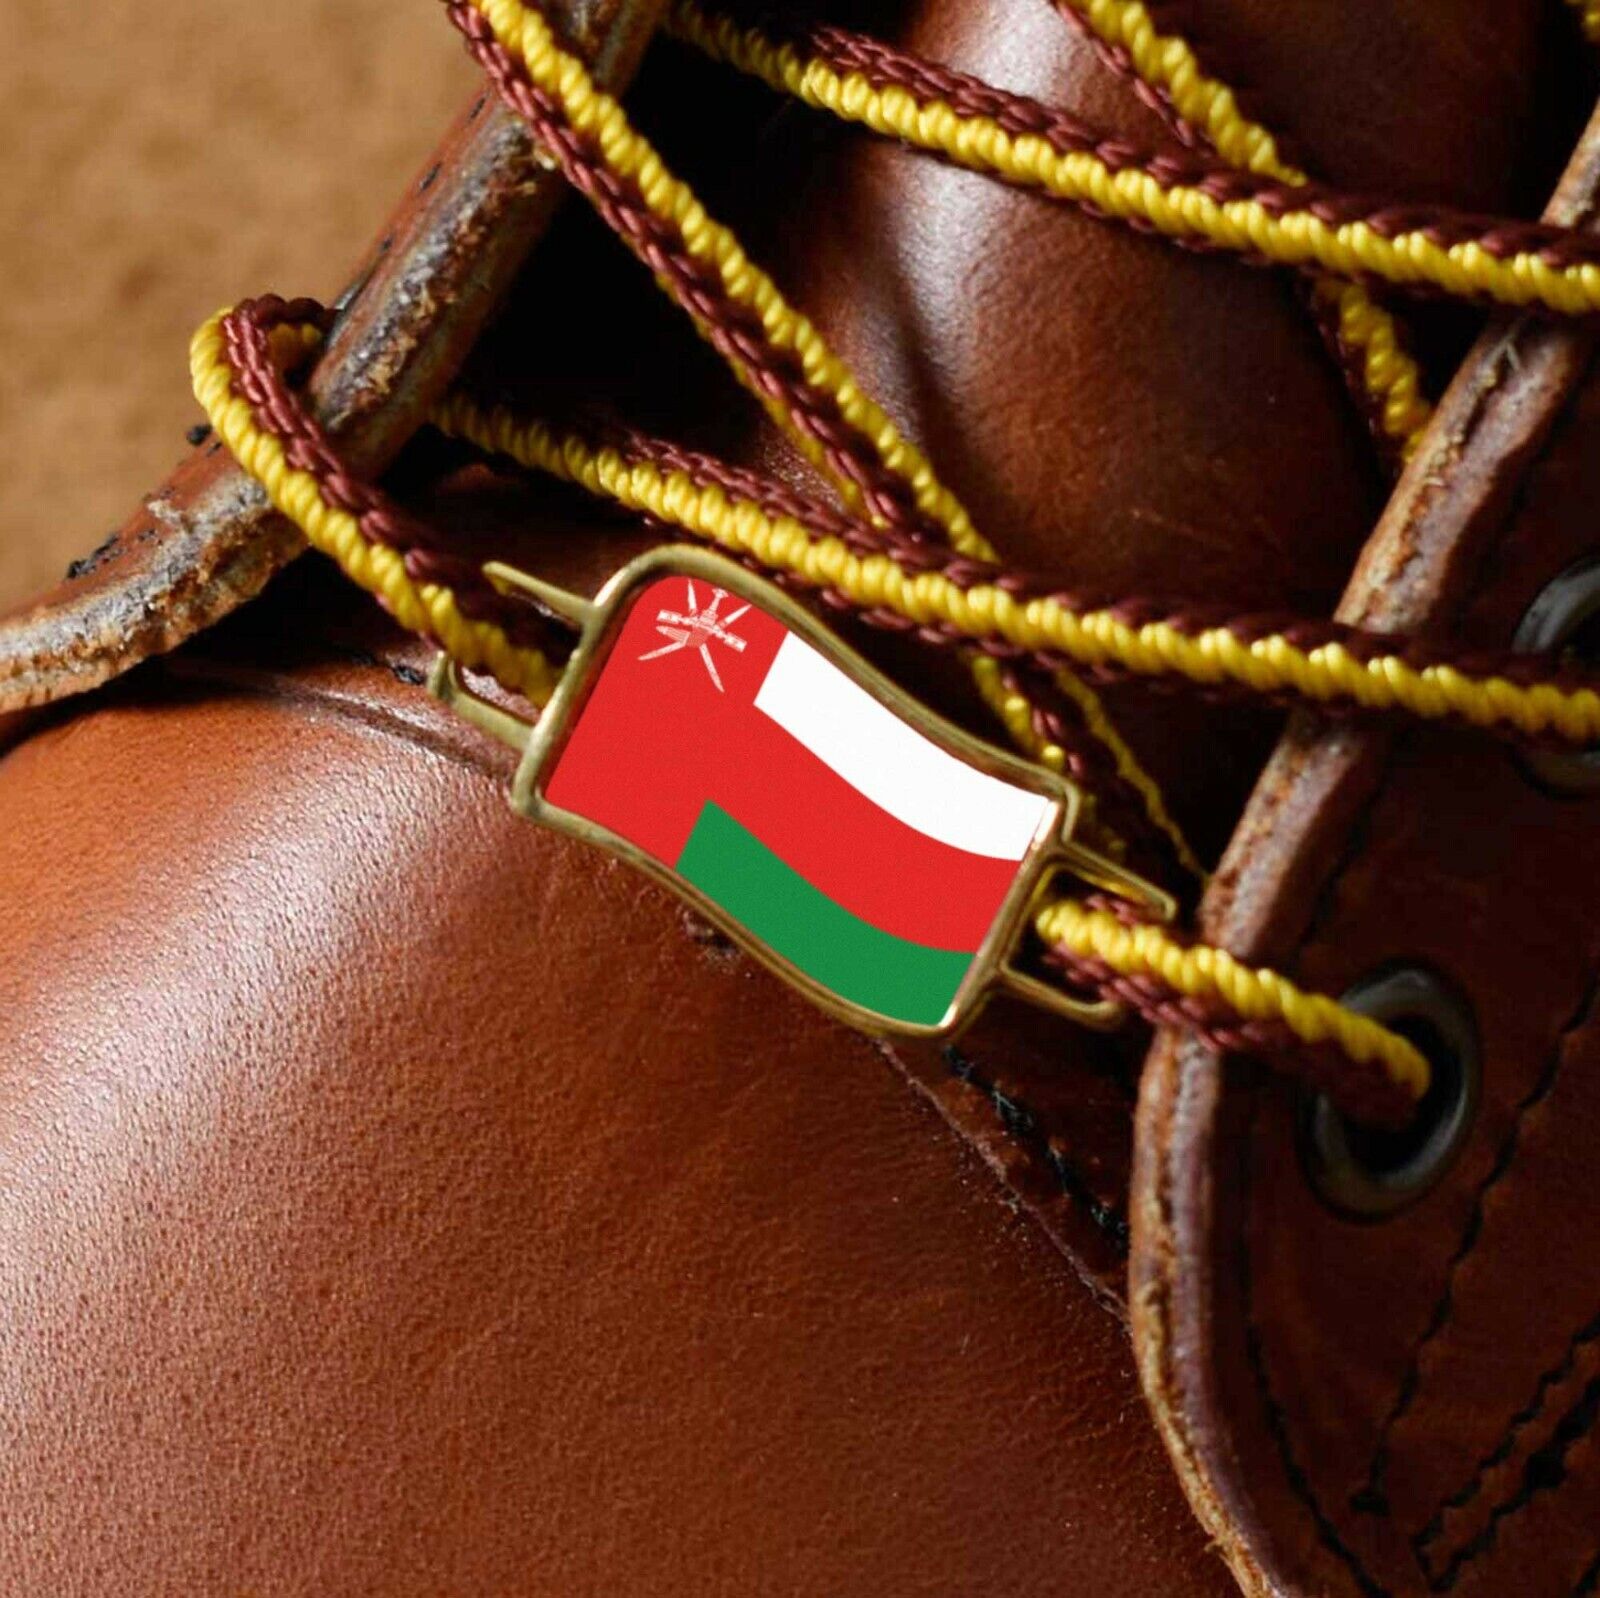 Oman Flags Shoes Boot Shoelace Keeper Holder Charm BrooklynMaker